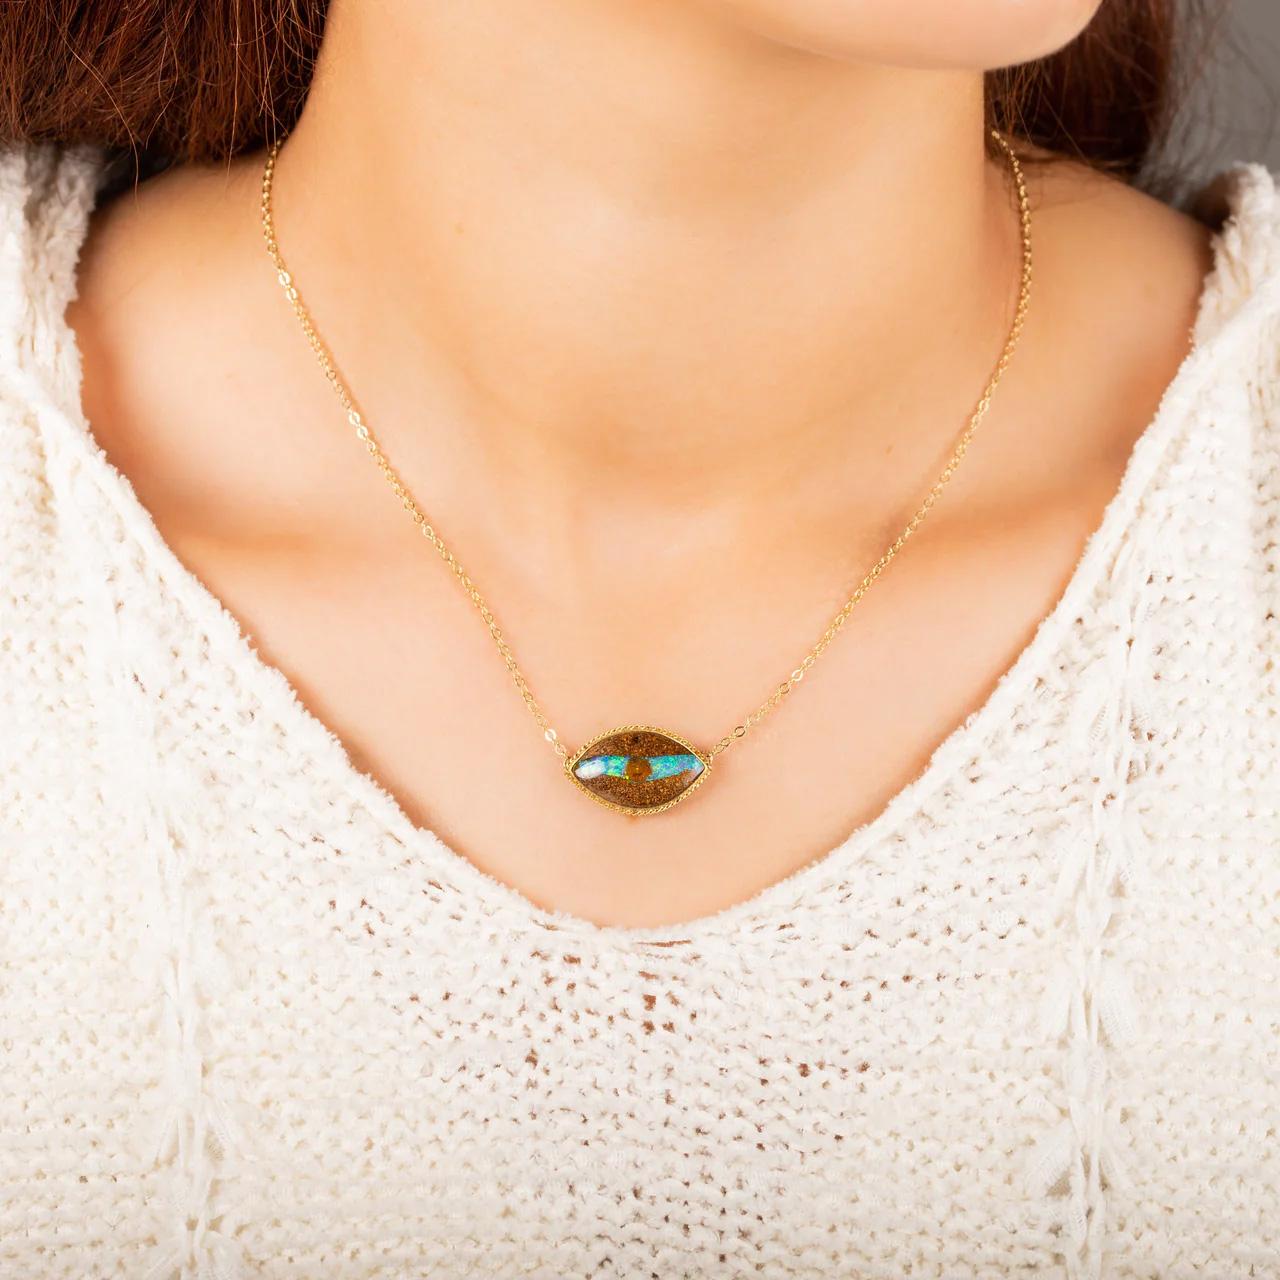 What will you spy with your Opal eye? This Opalized Wood’s dark, textured sides part to reveal a swath of varicolored blue and electric green iridescence bisected by a darker circle, a natural effect that just happens to look like a pupil peering